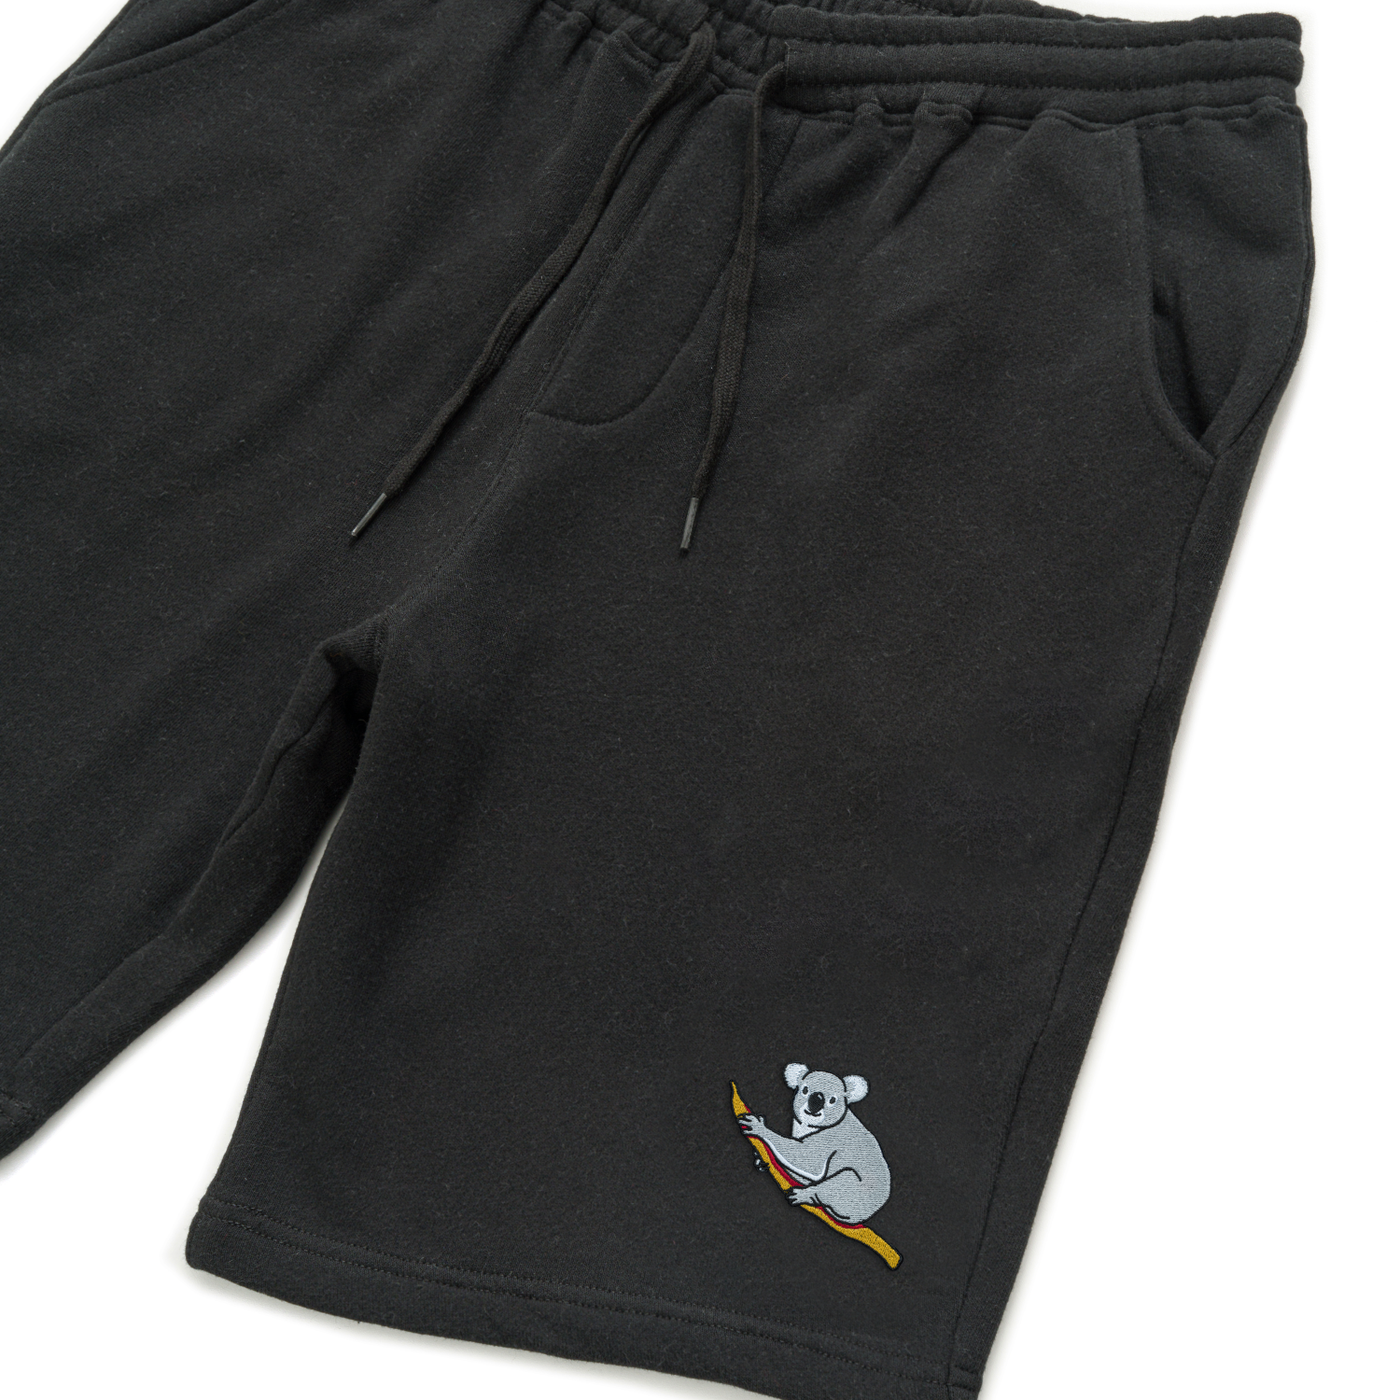 Bobby's Planet Men's Embroidered Koala Shorts from Australia Down Under Animals Collection in Black Color#color_black